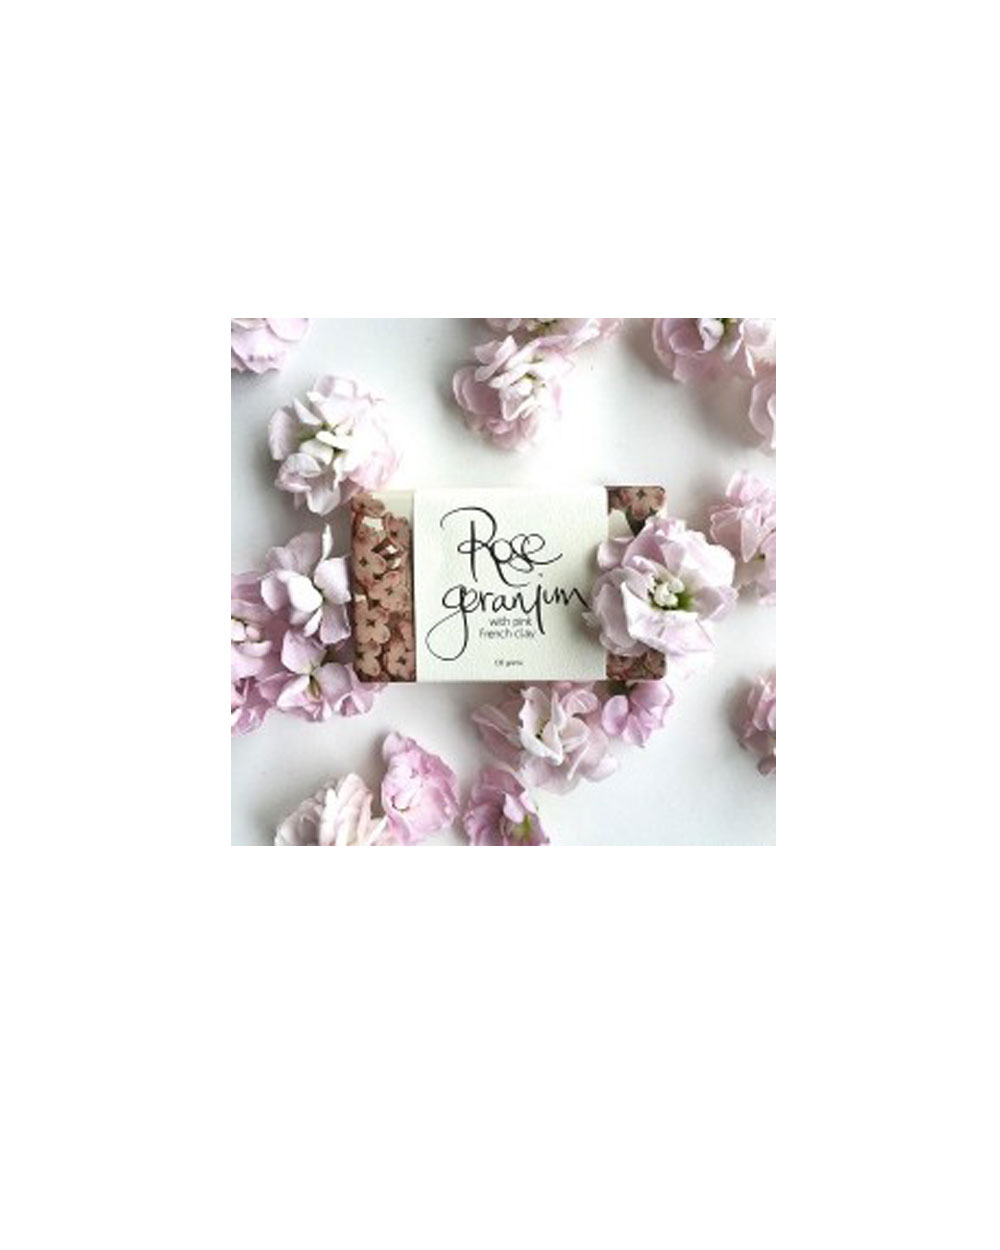 Rose-Geranium-with-Pink-french-clay-from-East-Day-Spa_$16.99